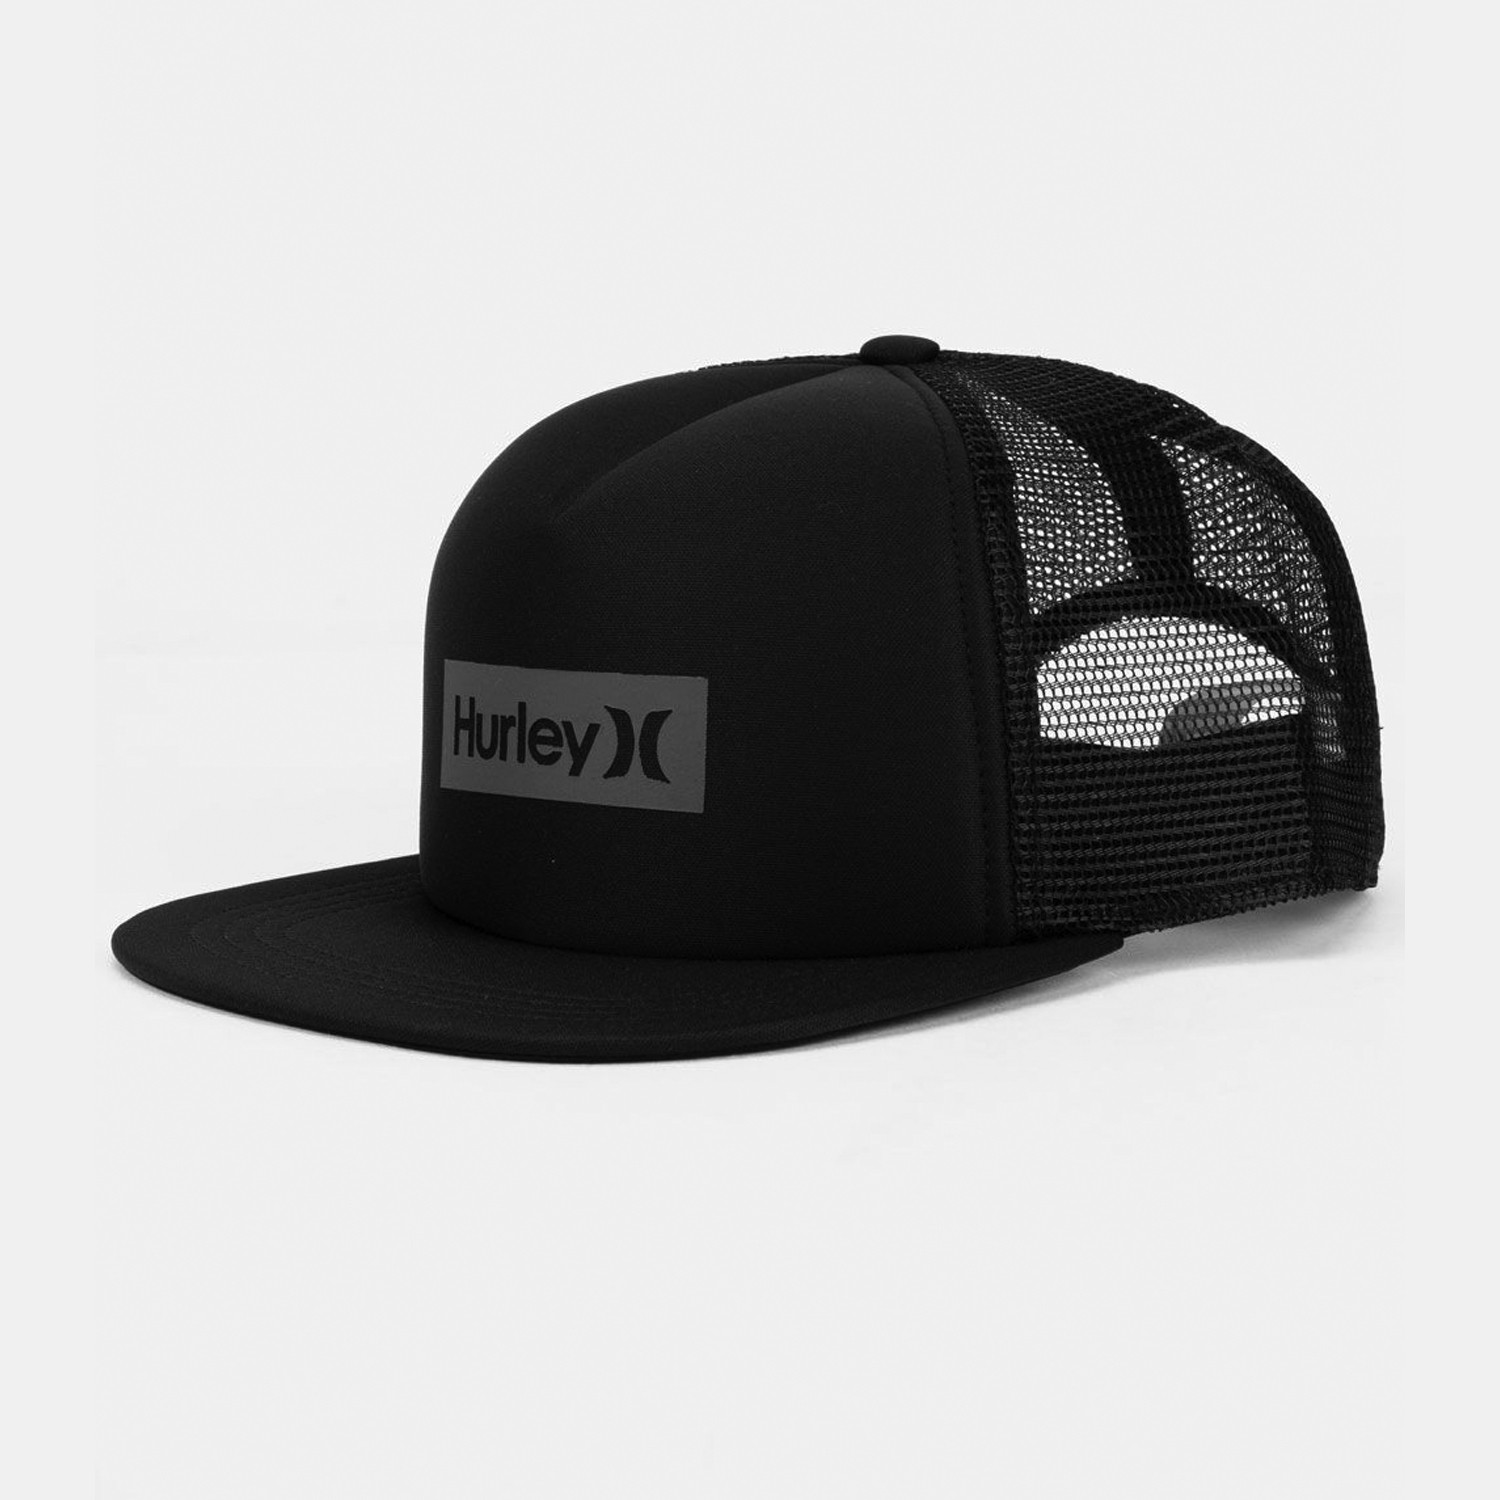 Hurley One & Only Square Ανδρικό Καπέλο (9000075333_1469)